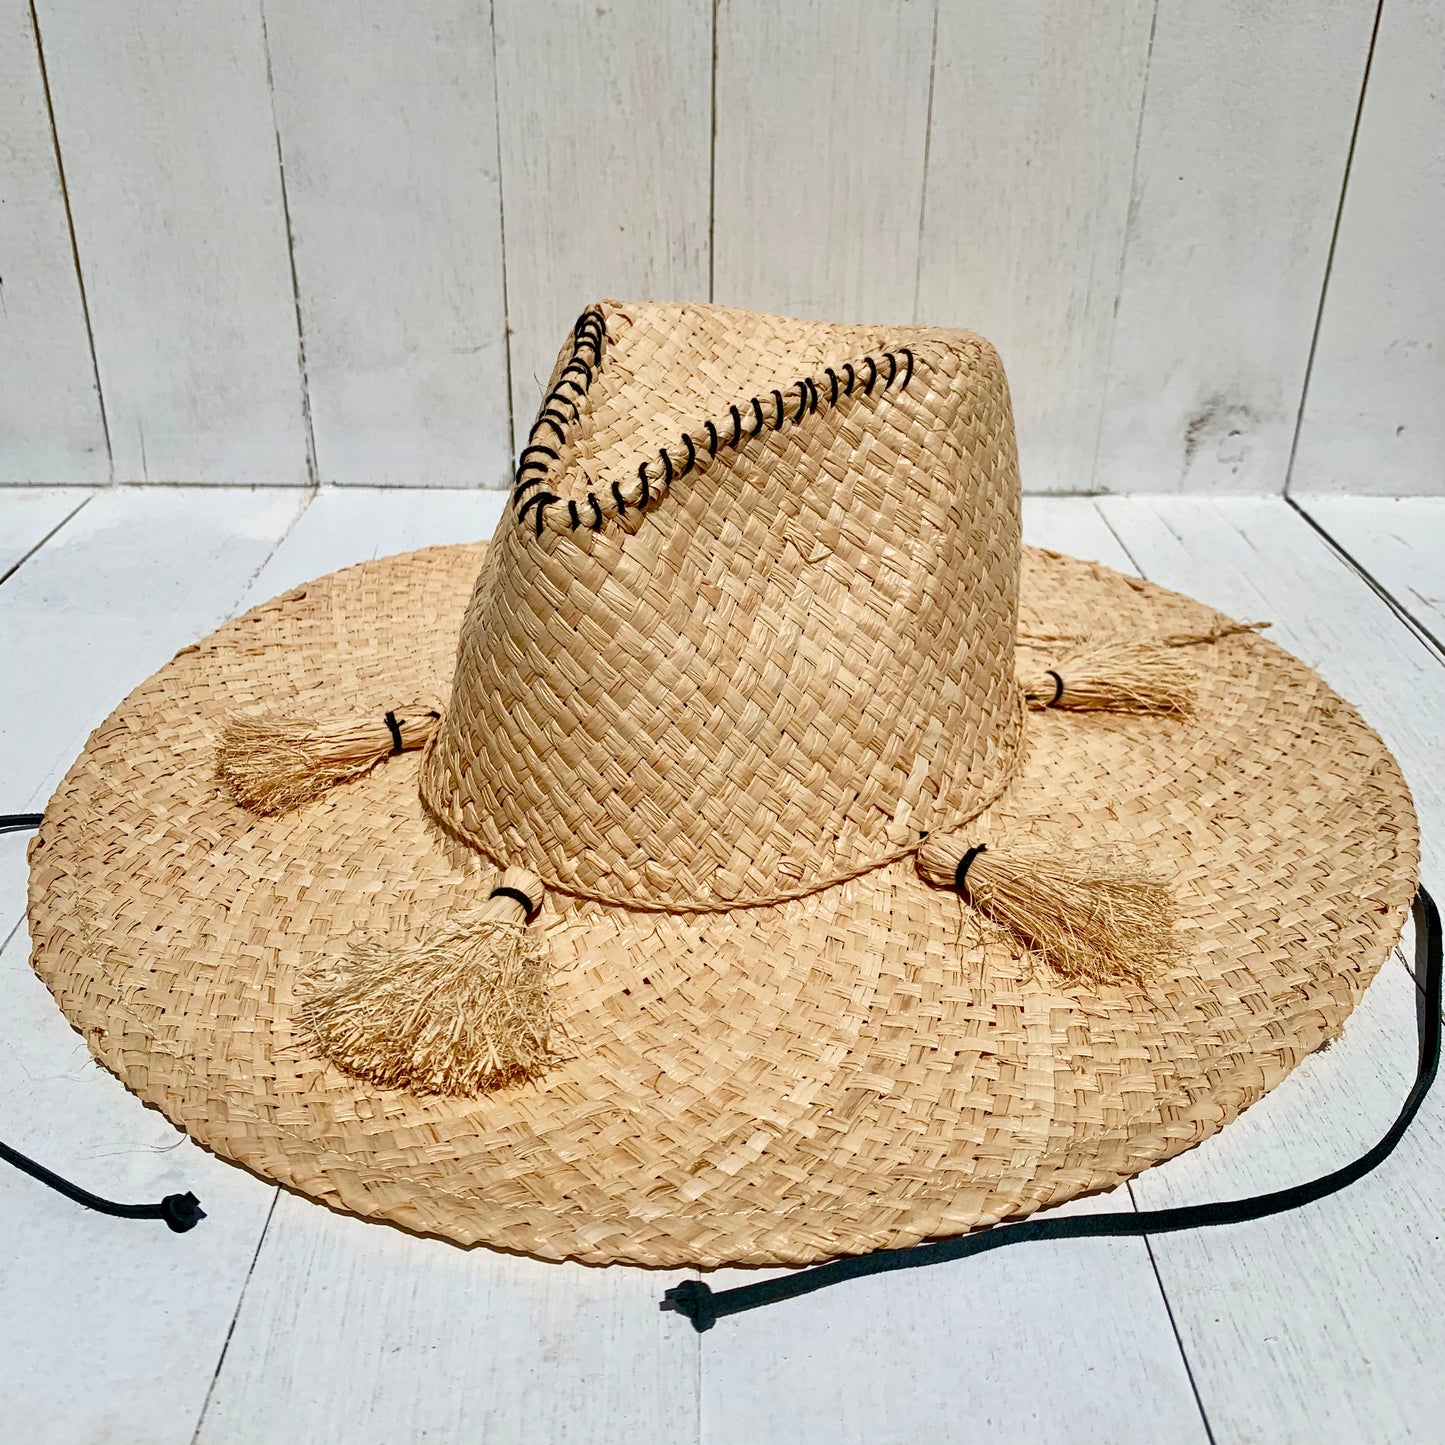 Pinch ME x, Handwoven Pure Raffia Fibre Hat with genuine leather chinstraps - UPF 50+